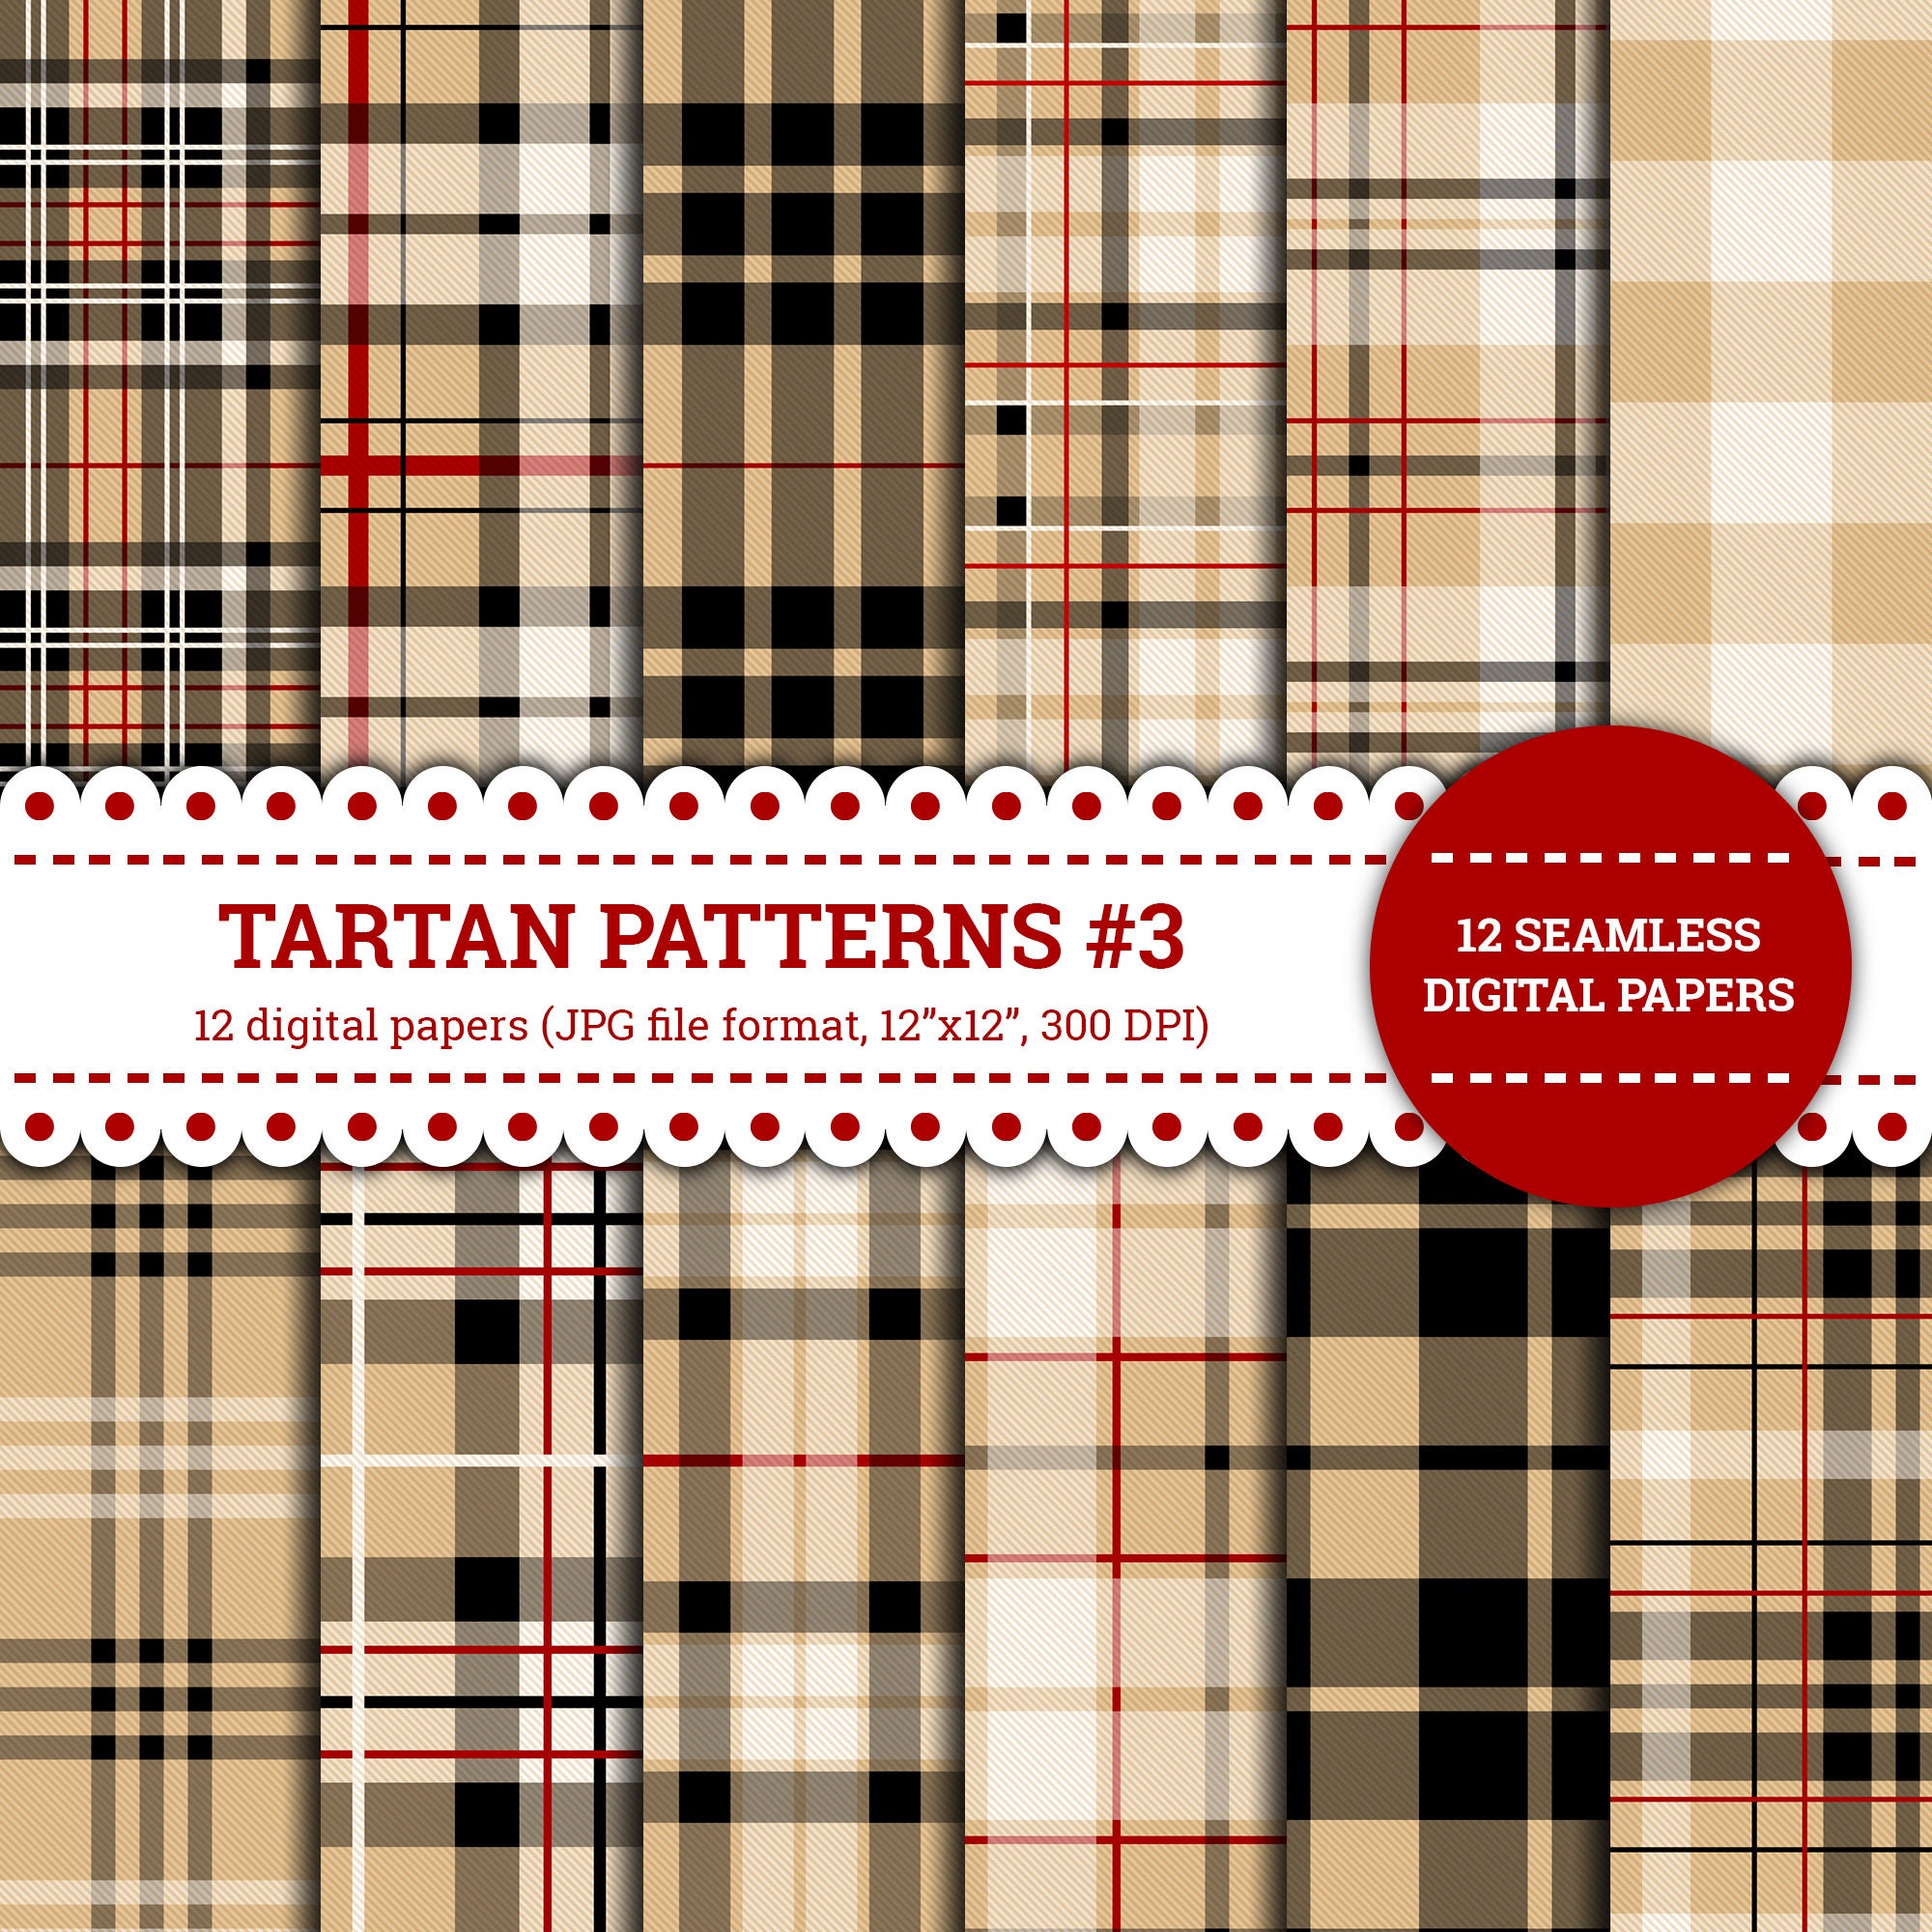 Tartan Patterns 3, Plaid, Gingham, Classic, Checked, Kilt, Flannel, Fabric,  Scotland, Pattern, Digital Papers, Beige and White, Seamless -  Finland